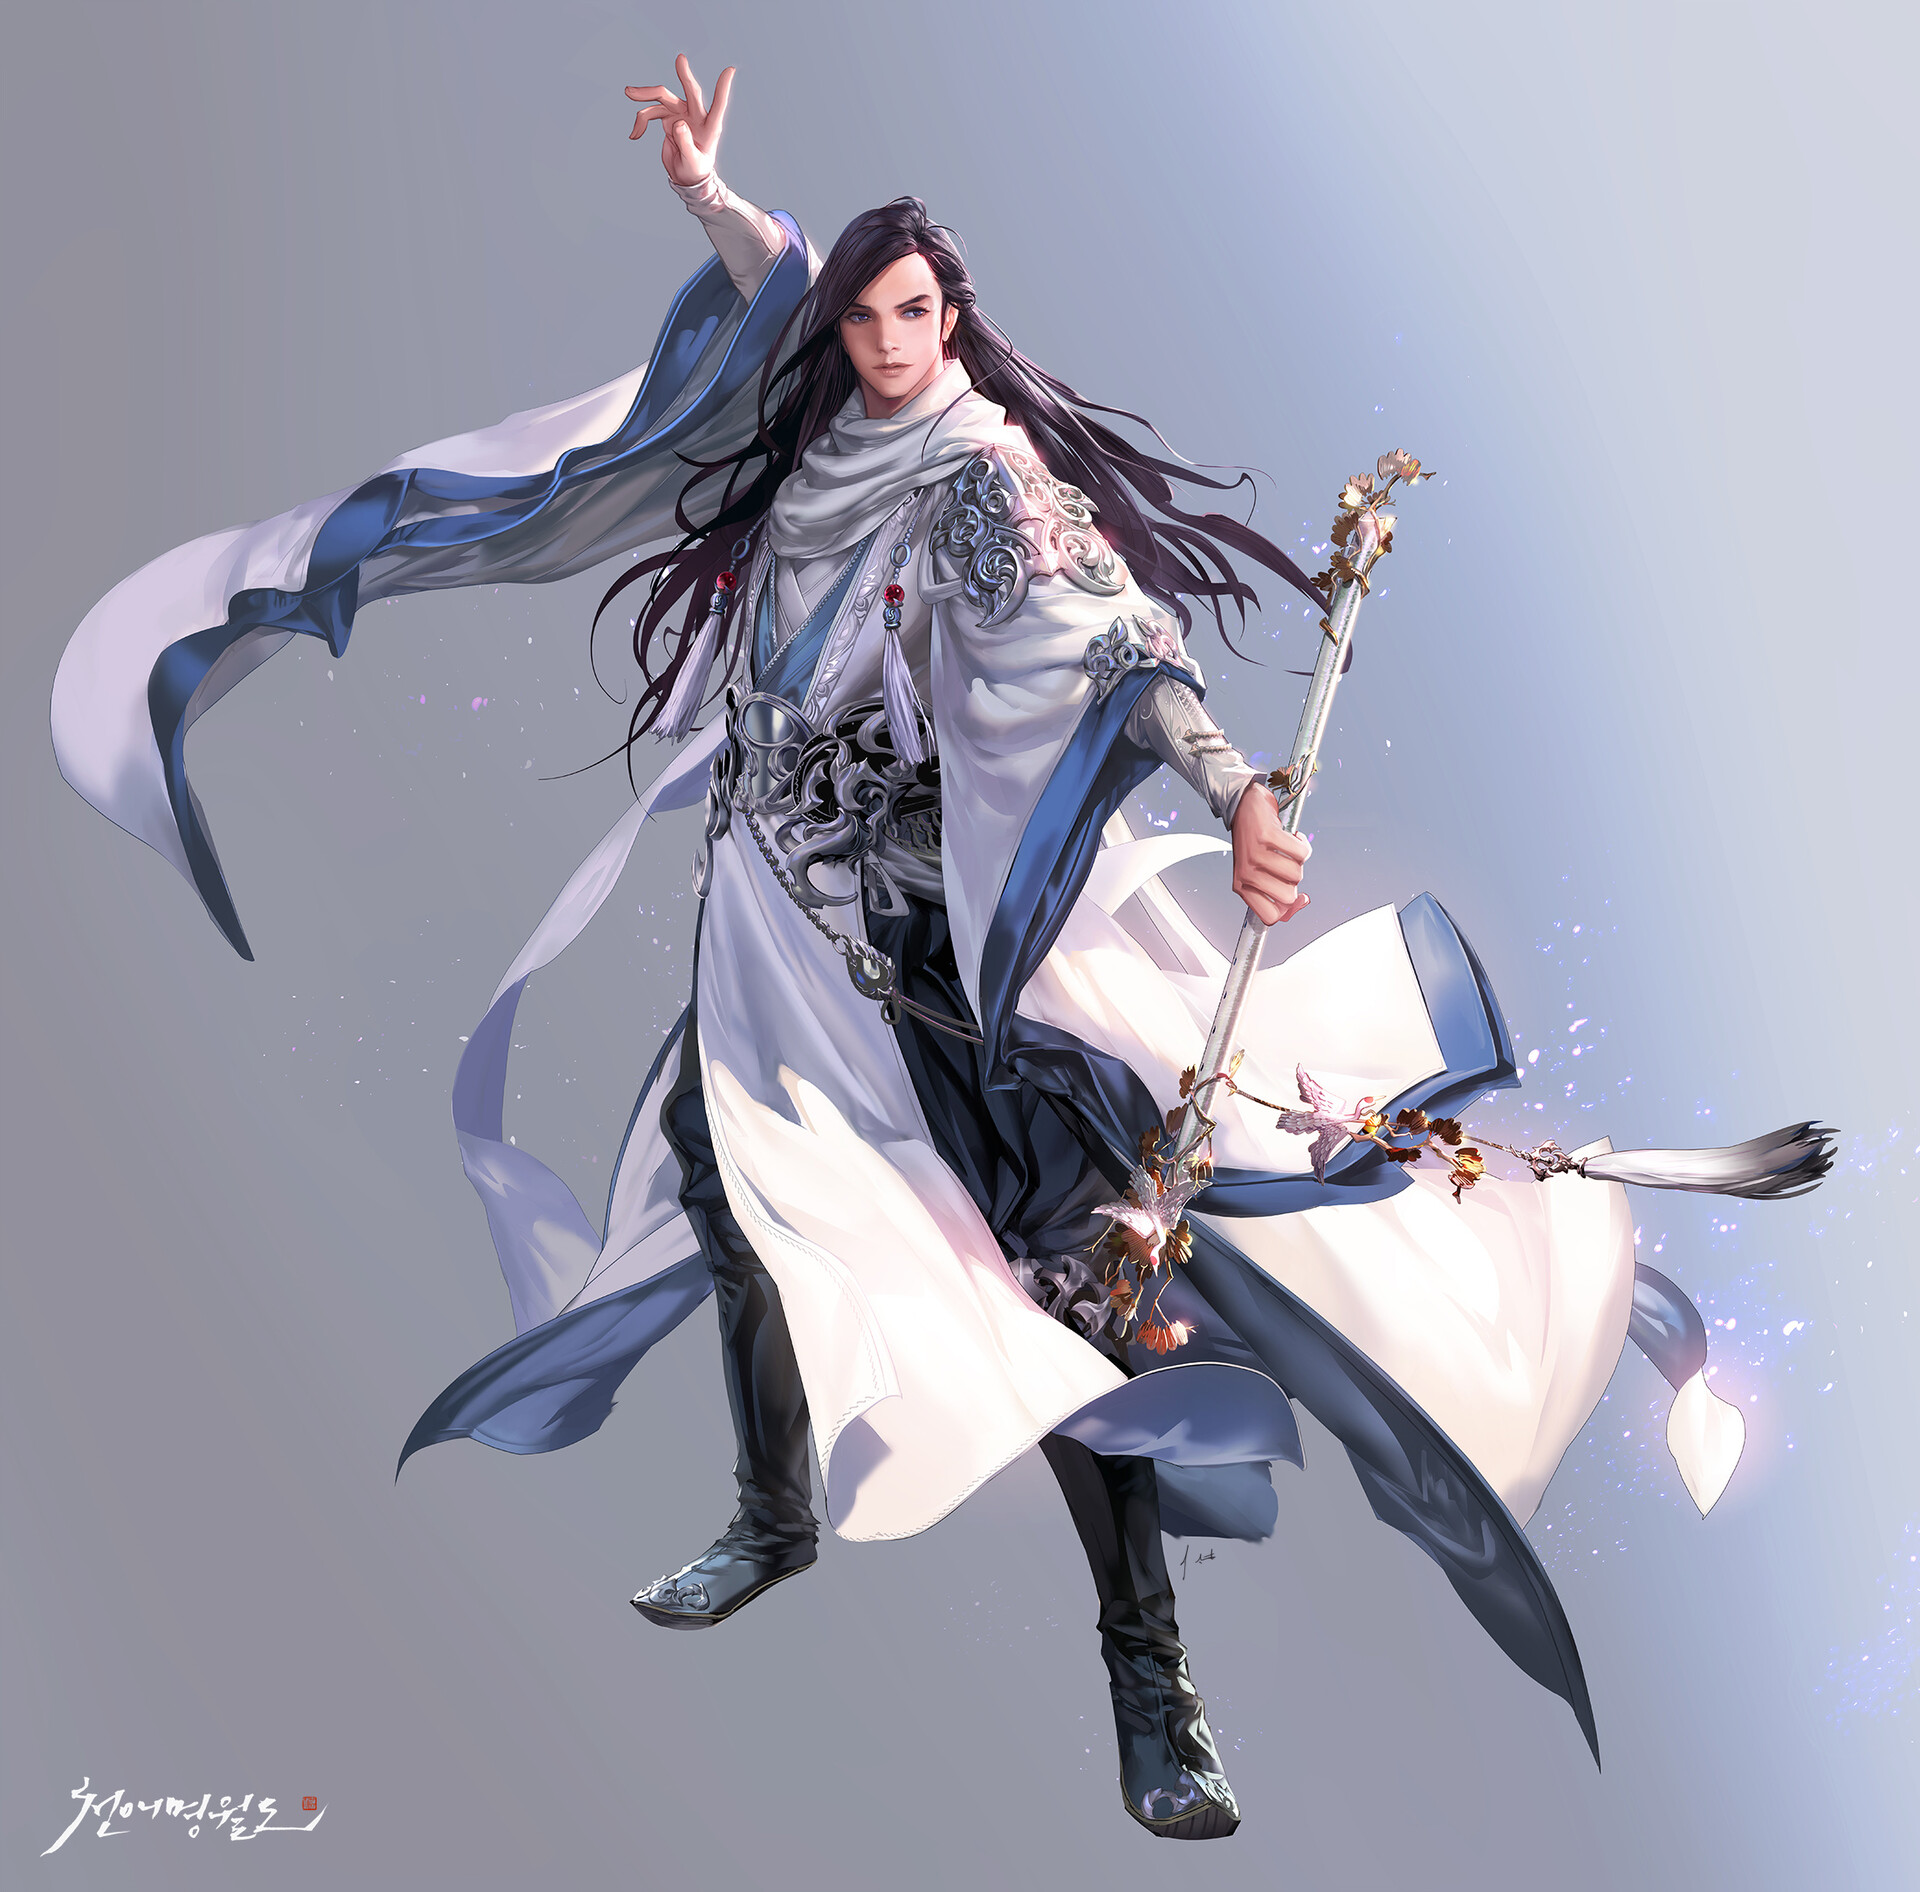 Drawing Men Dark Hair Long Hair Magician Robes White Clothing Looking Away Wand Sparks Jewelry Simpl 1920x1892